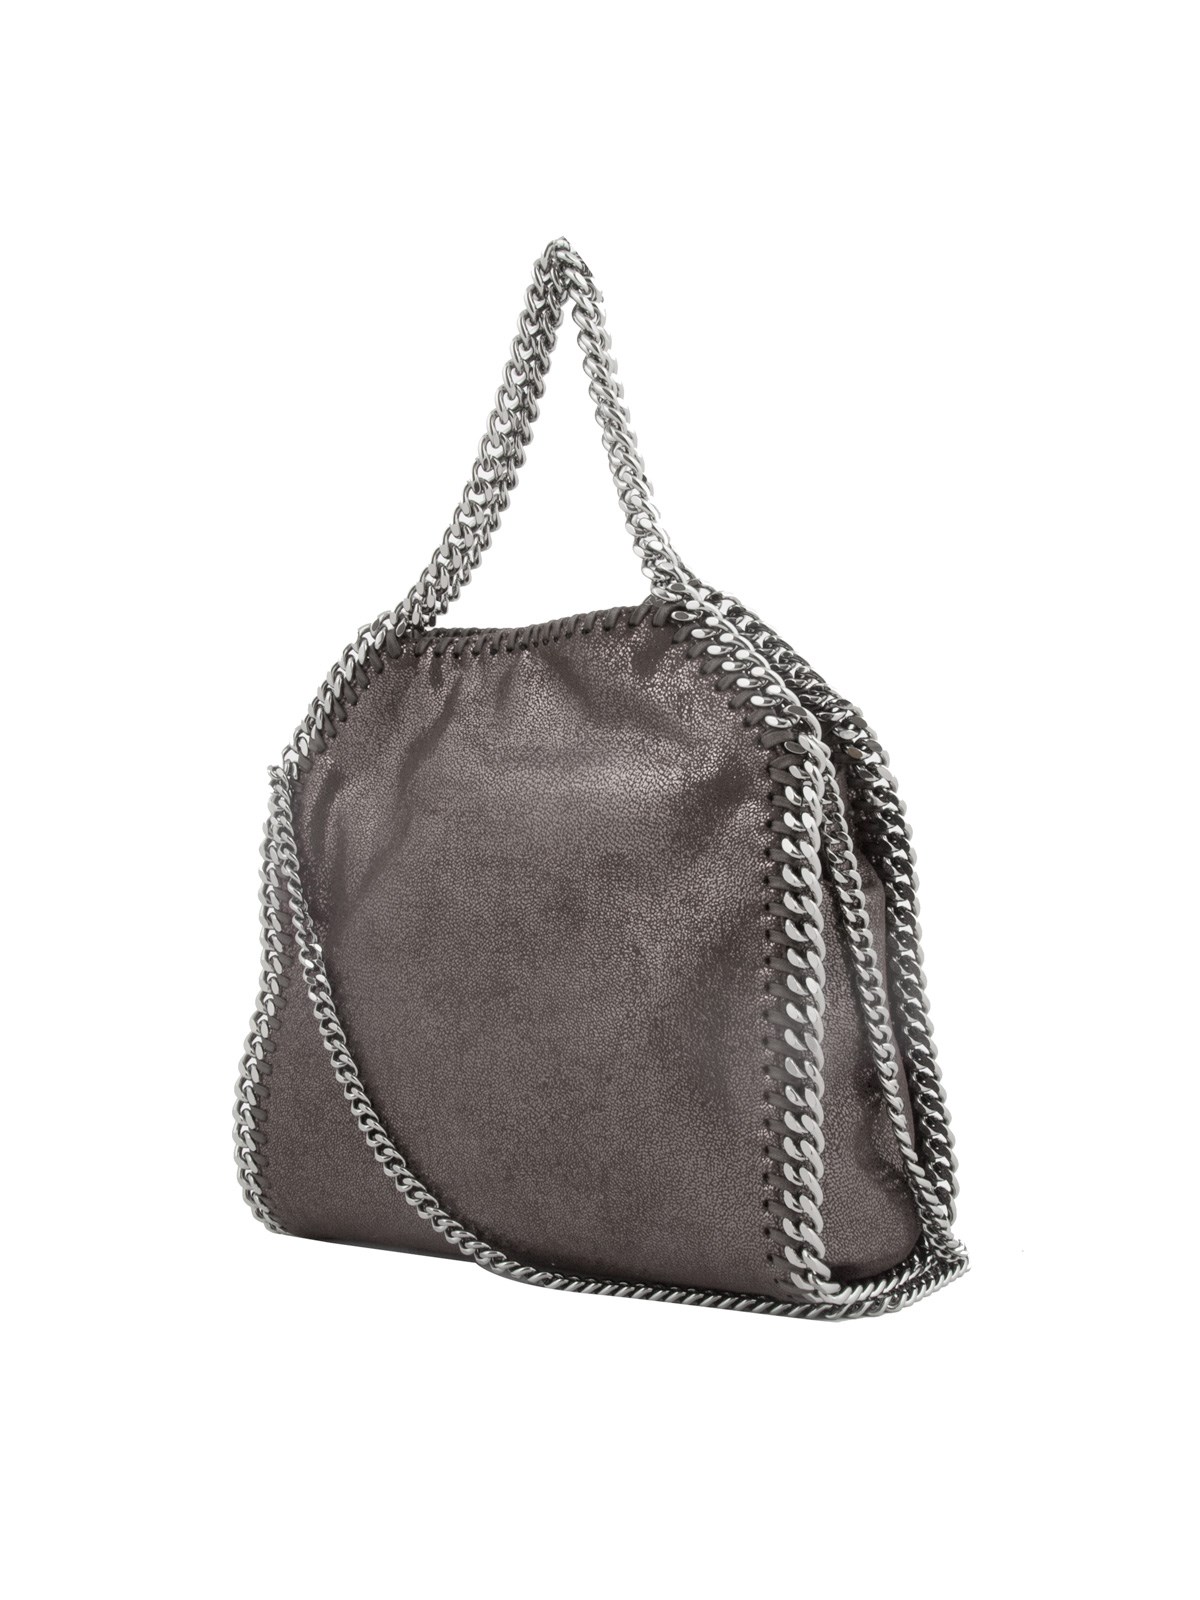 stella mccartney FALABELLA SHAGGY DEER TOTE BAG available on ...